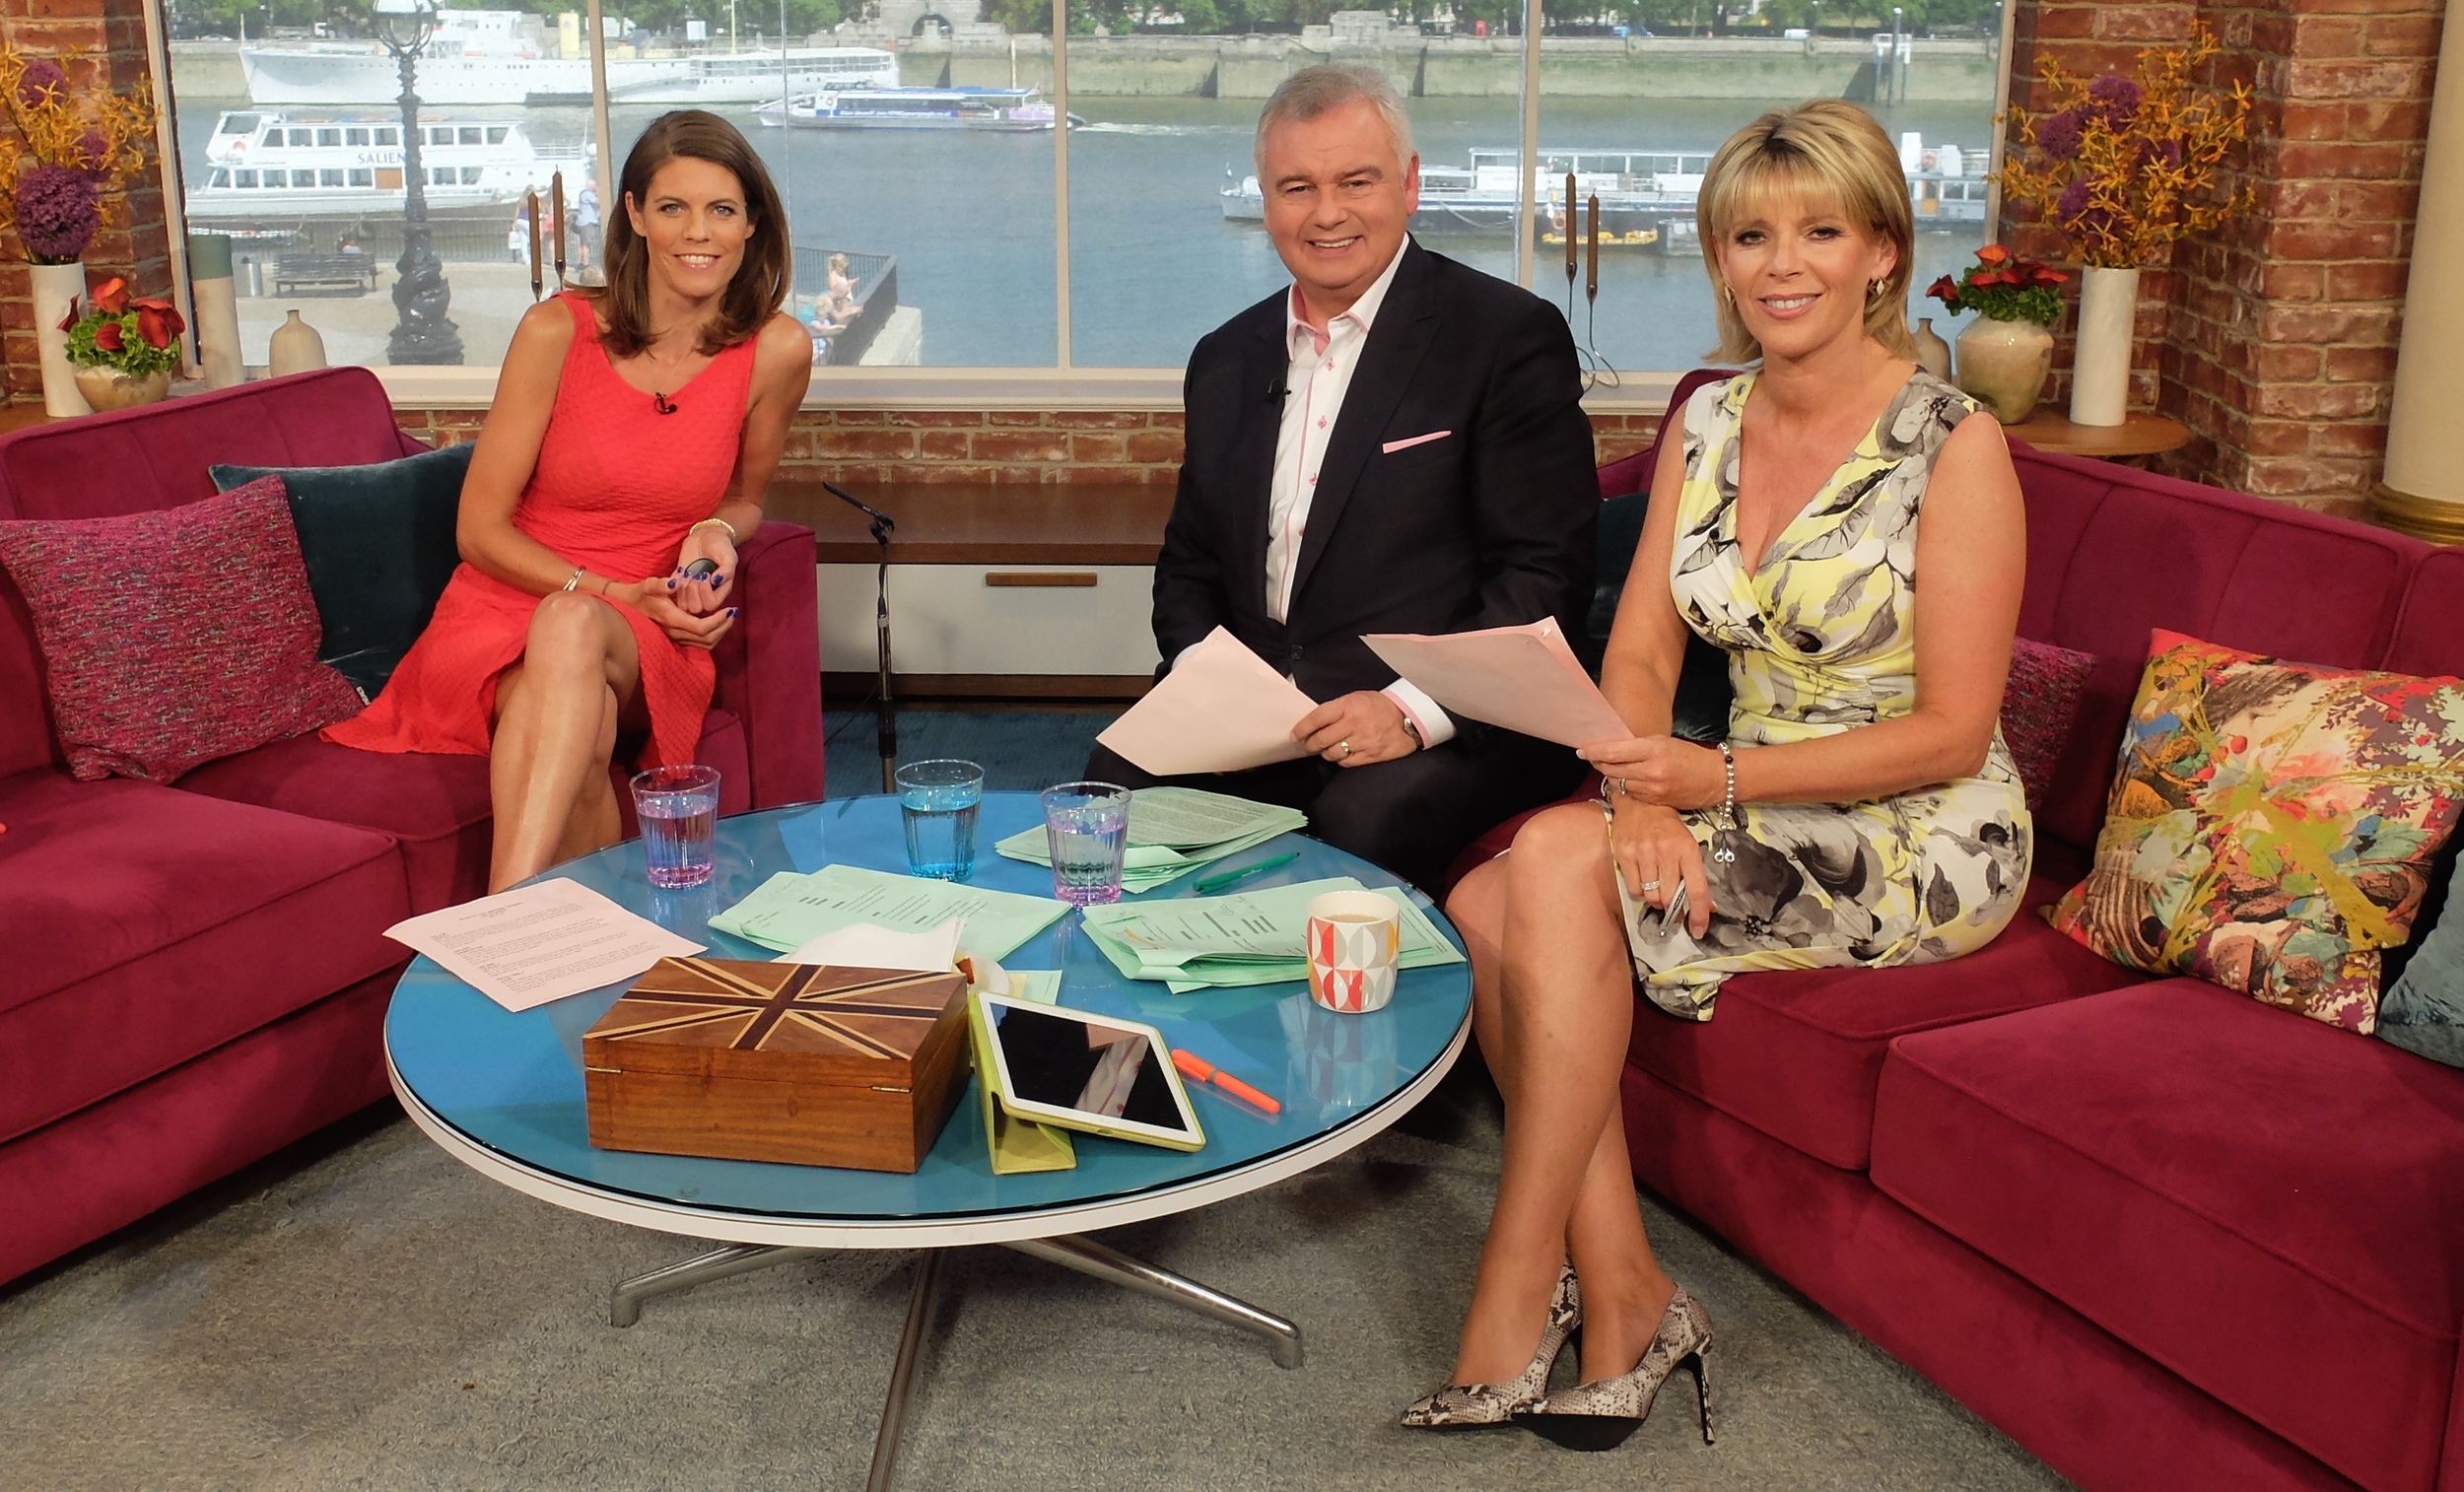 ON ITV'S 'THIS MORNING'